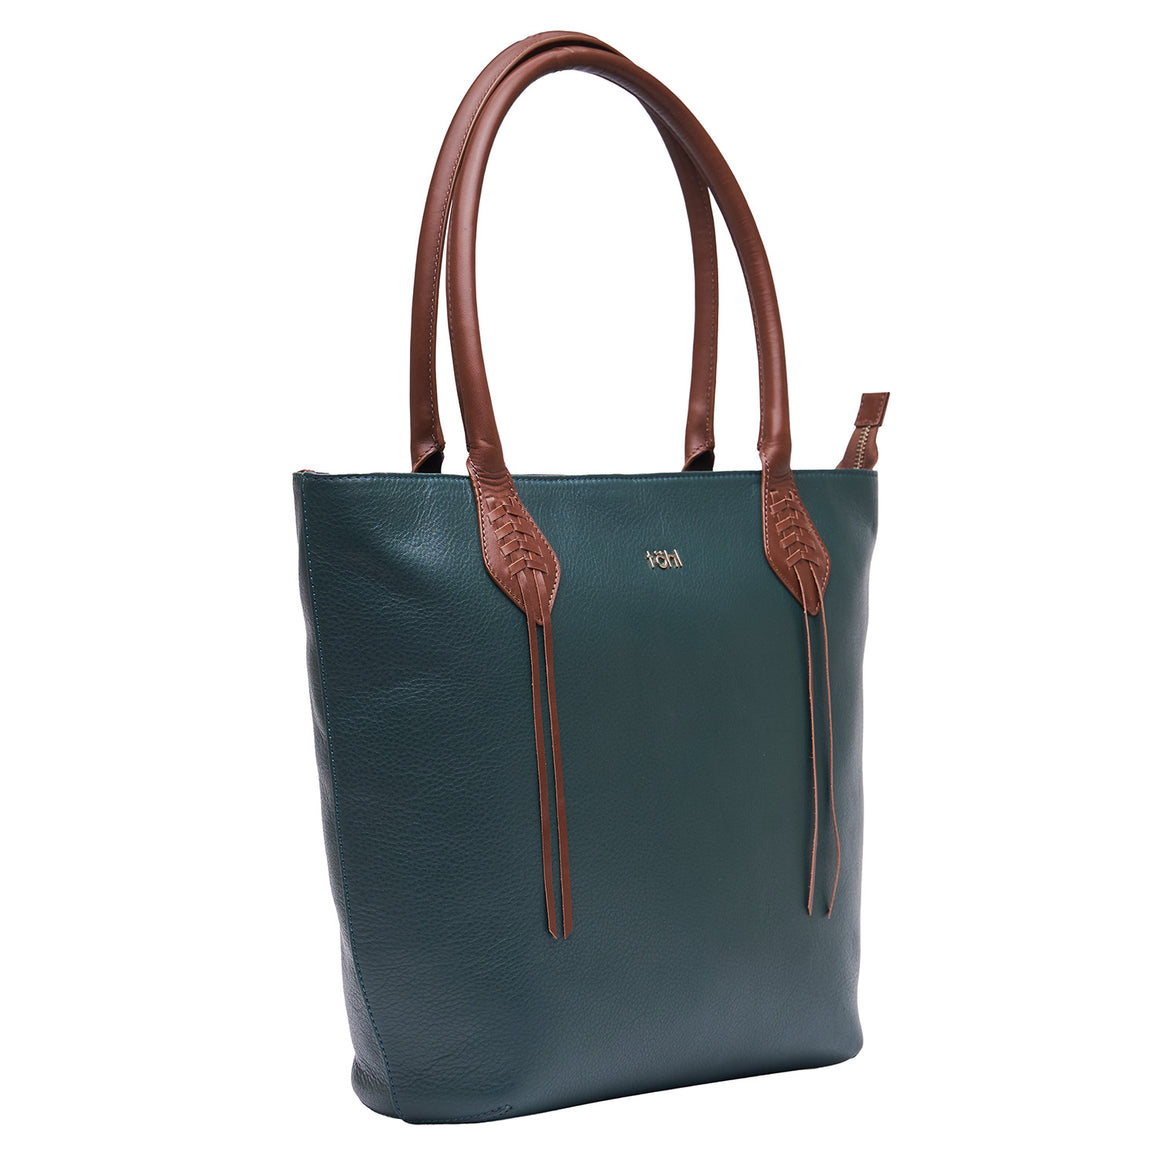 KIFFEN WOMEN'S TOTE BAG - FOREST GREEN